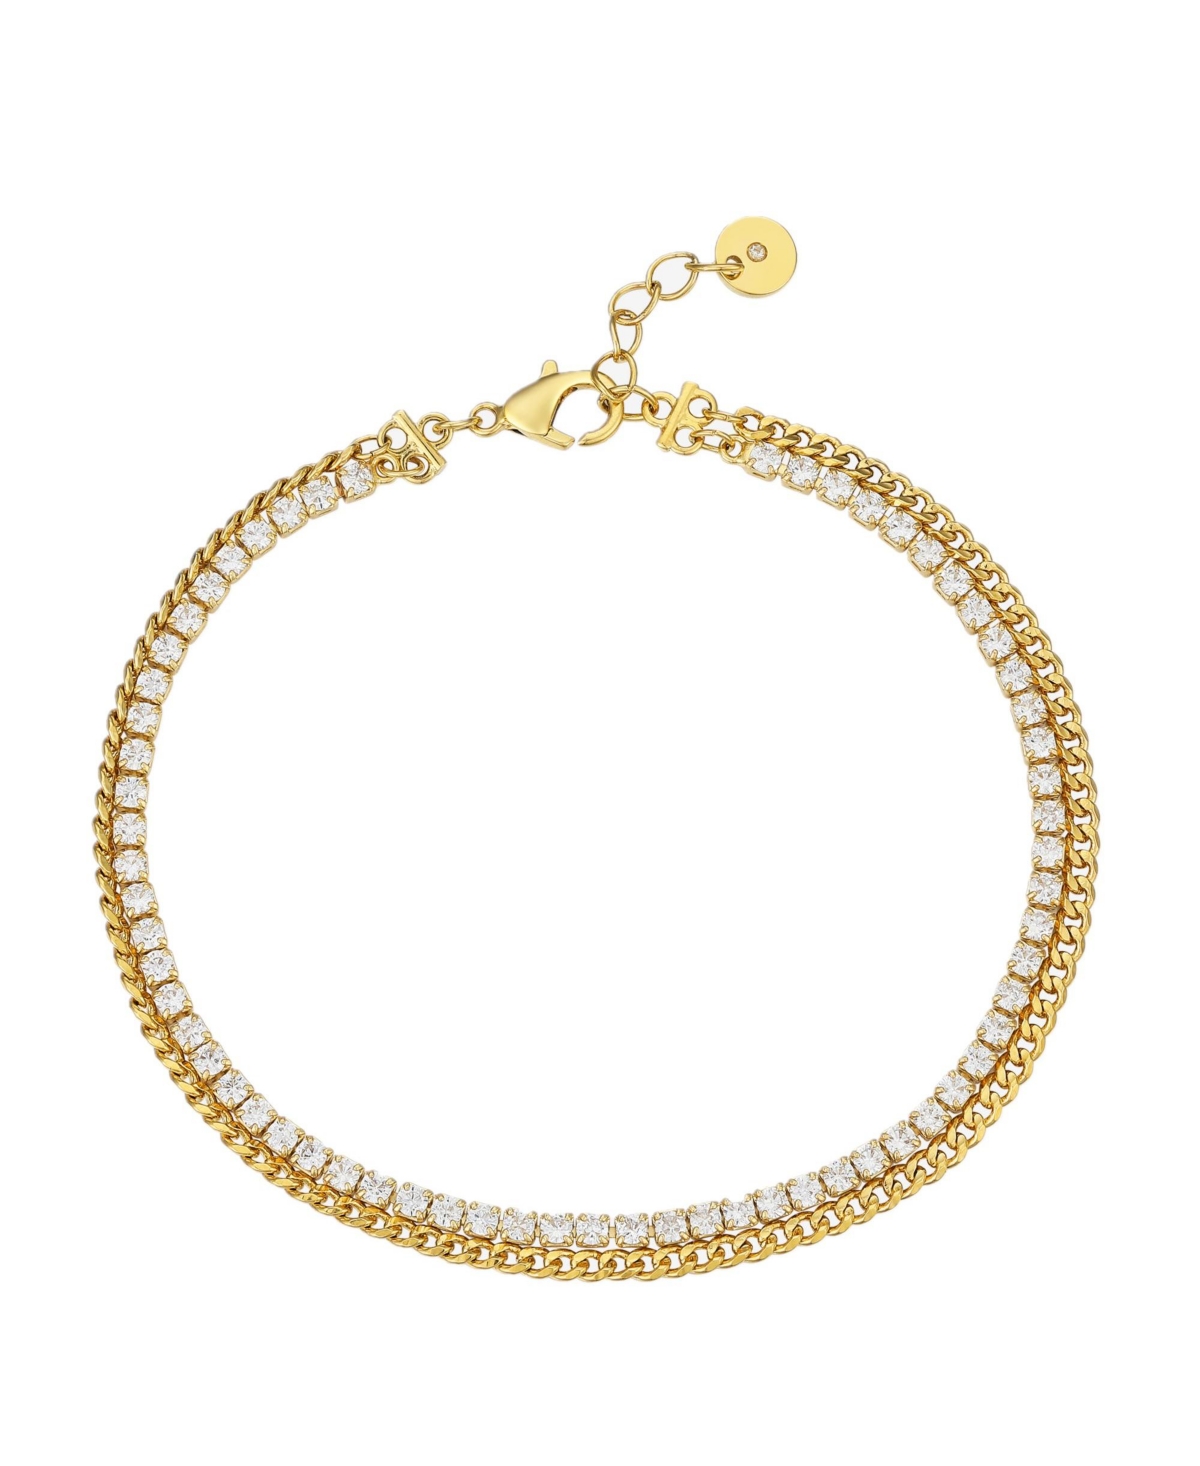 Clear Cubic Zirconia Stone and Curb Link Bracelet - Gold